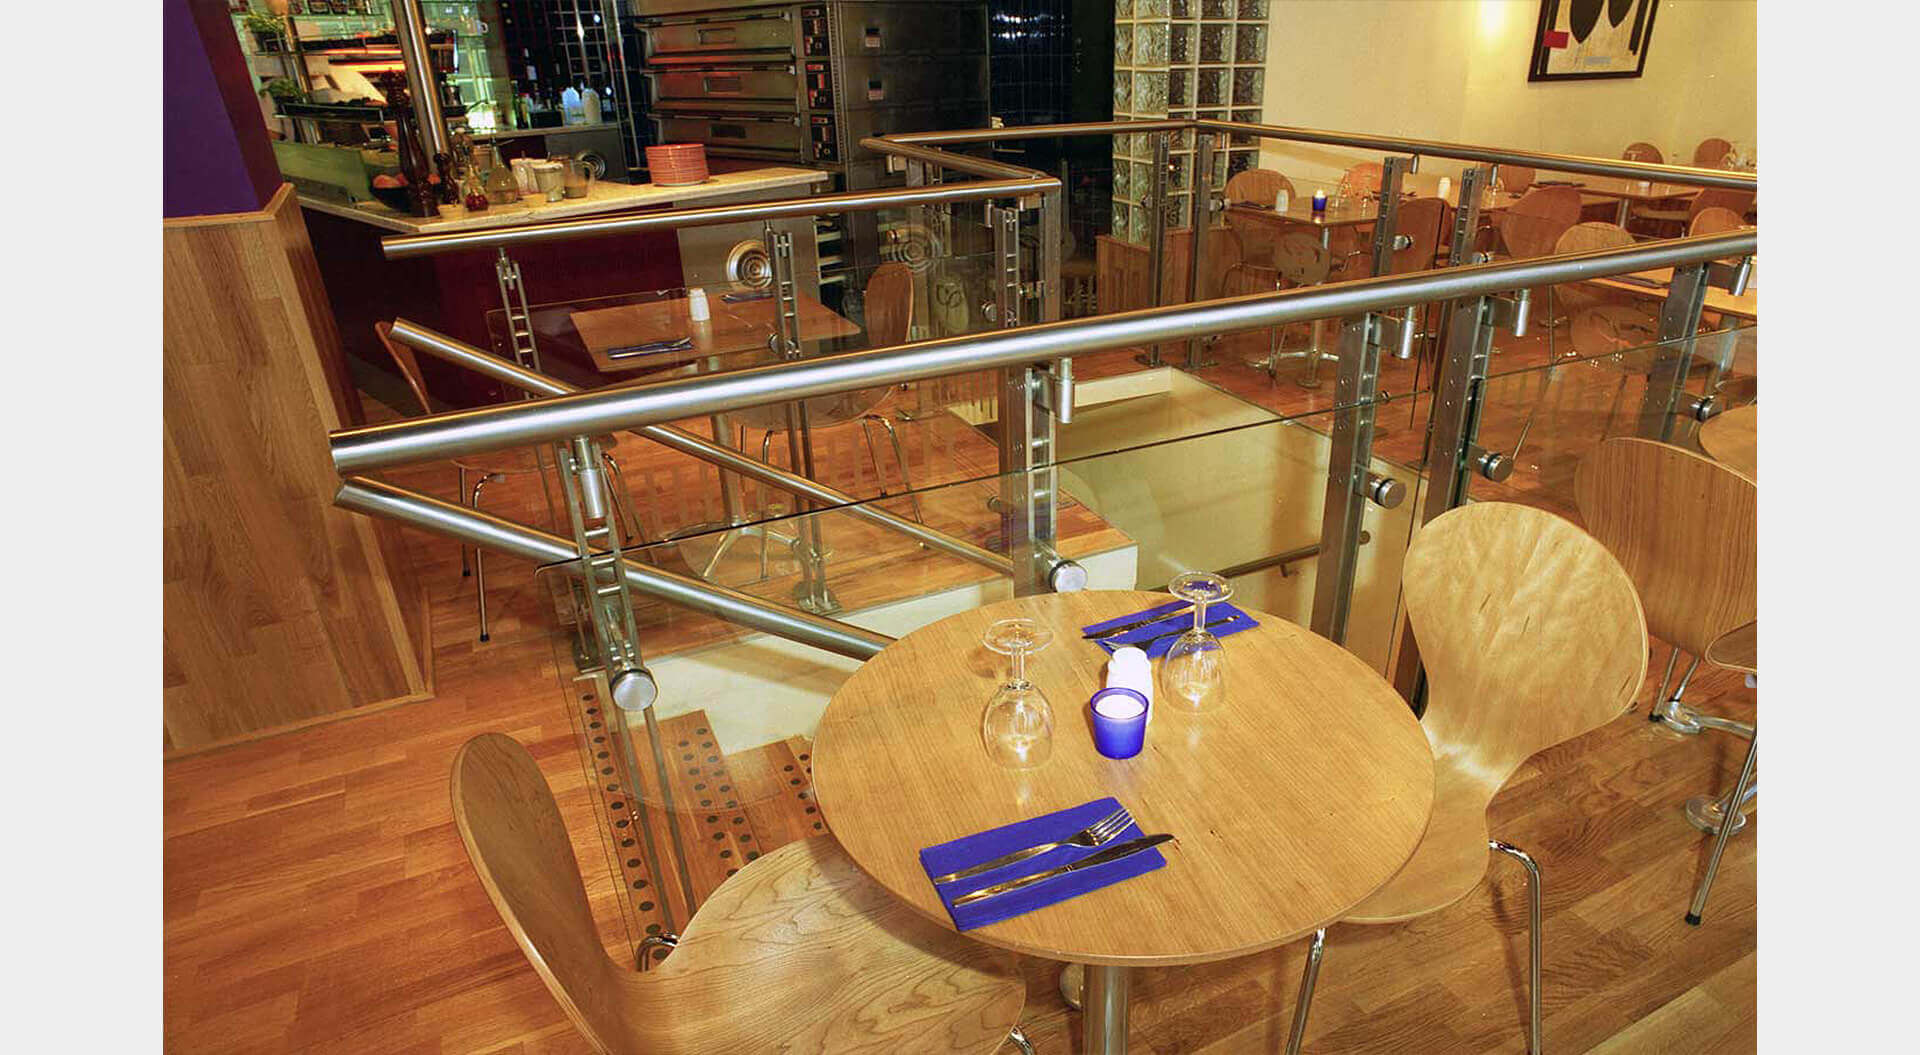 Caffe Piazza restaurant table and seating next to staircase design 